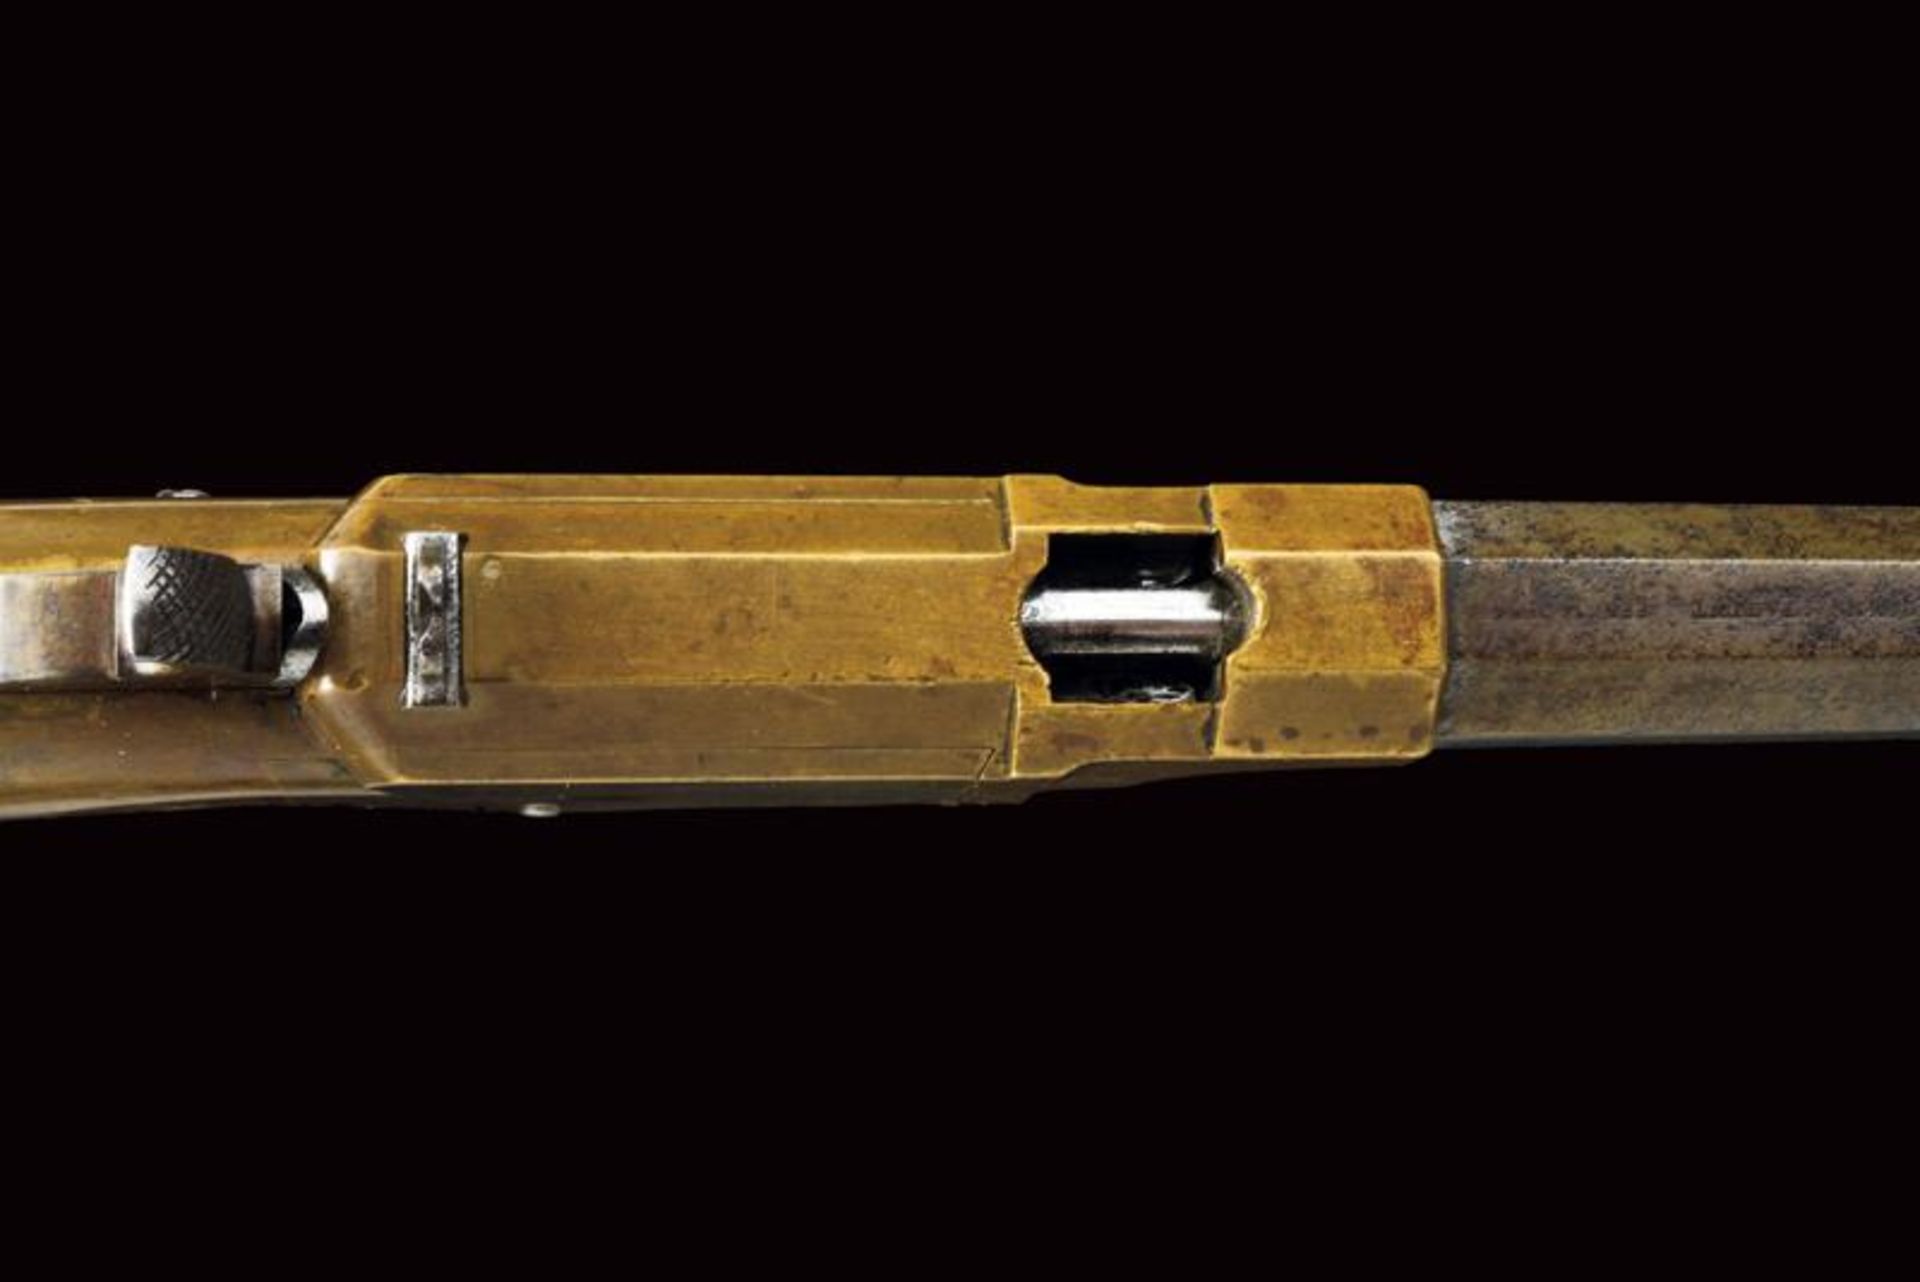 A Volcanic Lever Action No. 1 Pocket Pistol - Image 2 of 6